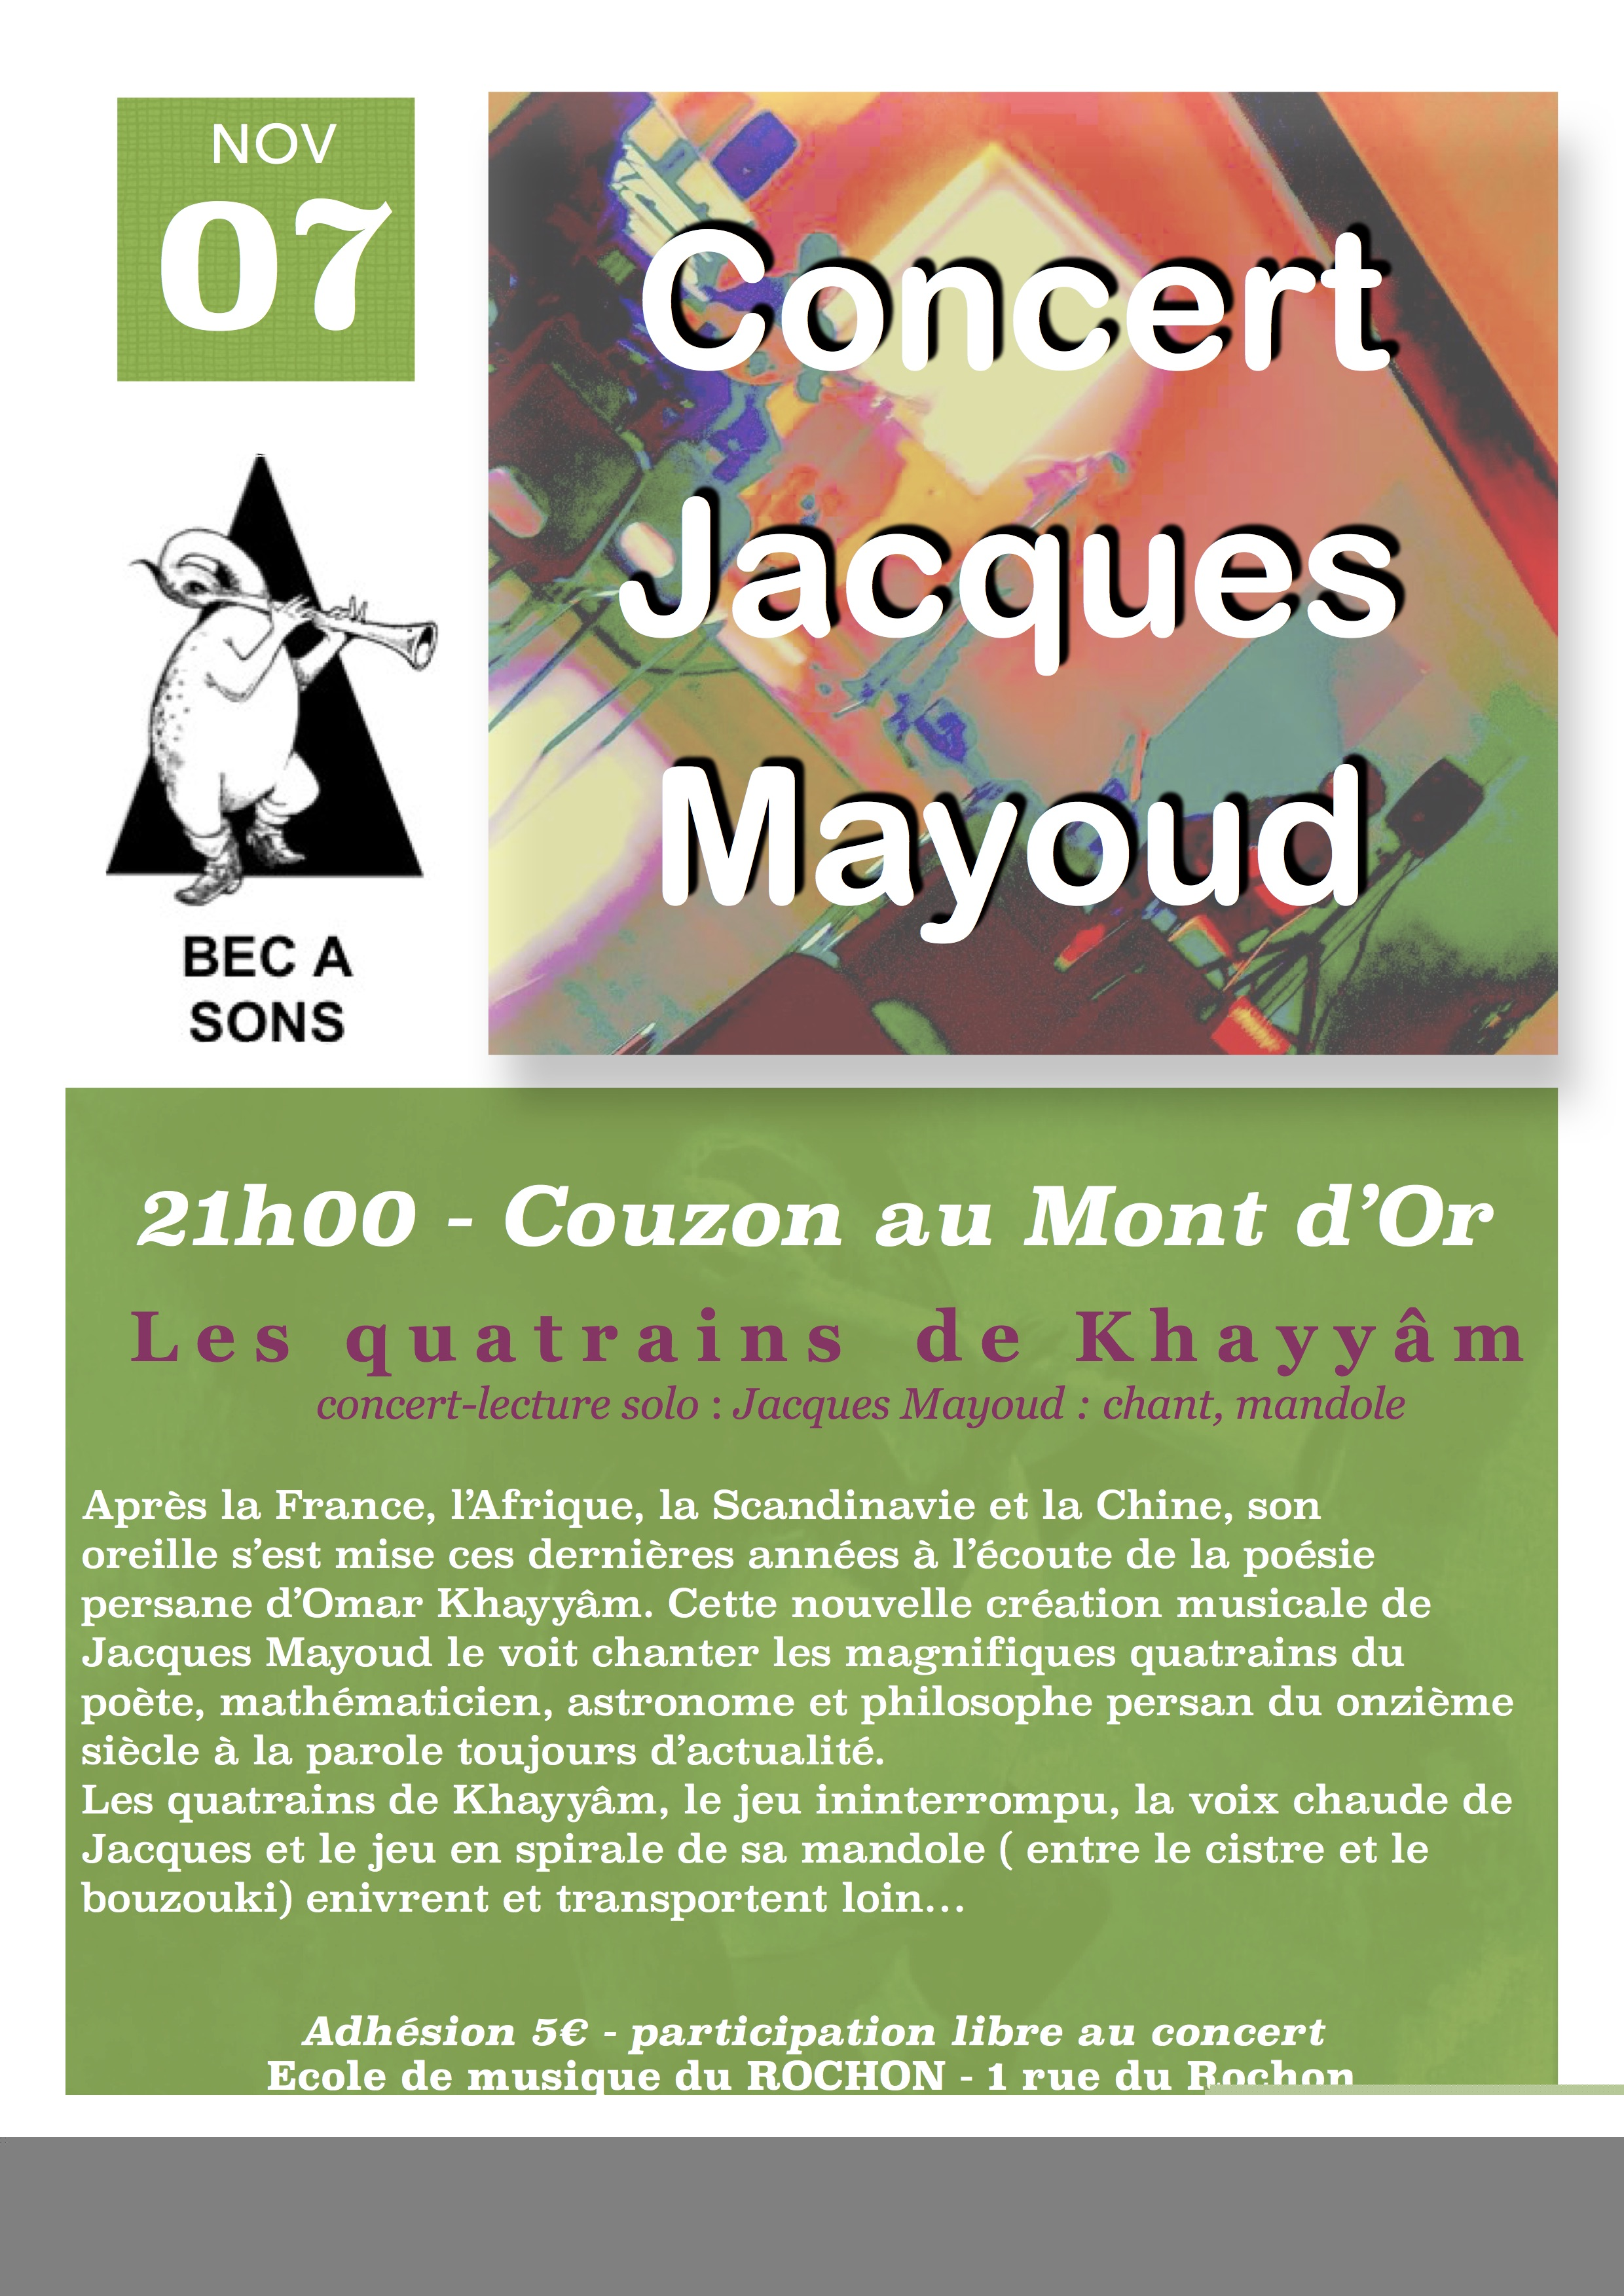 Concert Jacques Mayoux 2015.jpg